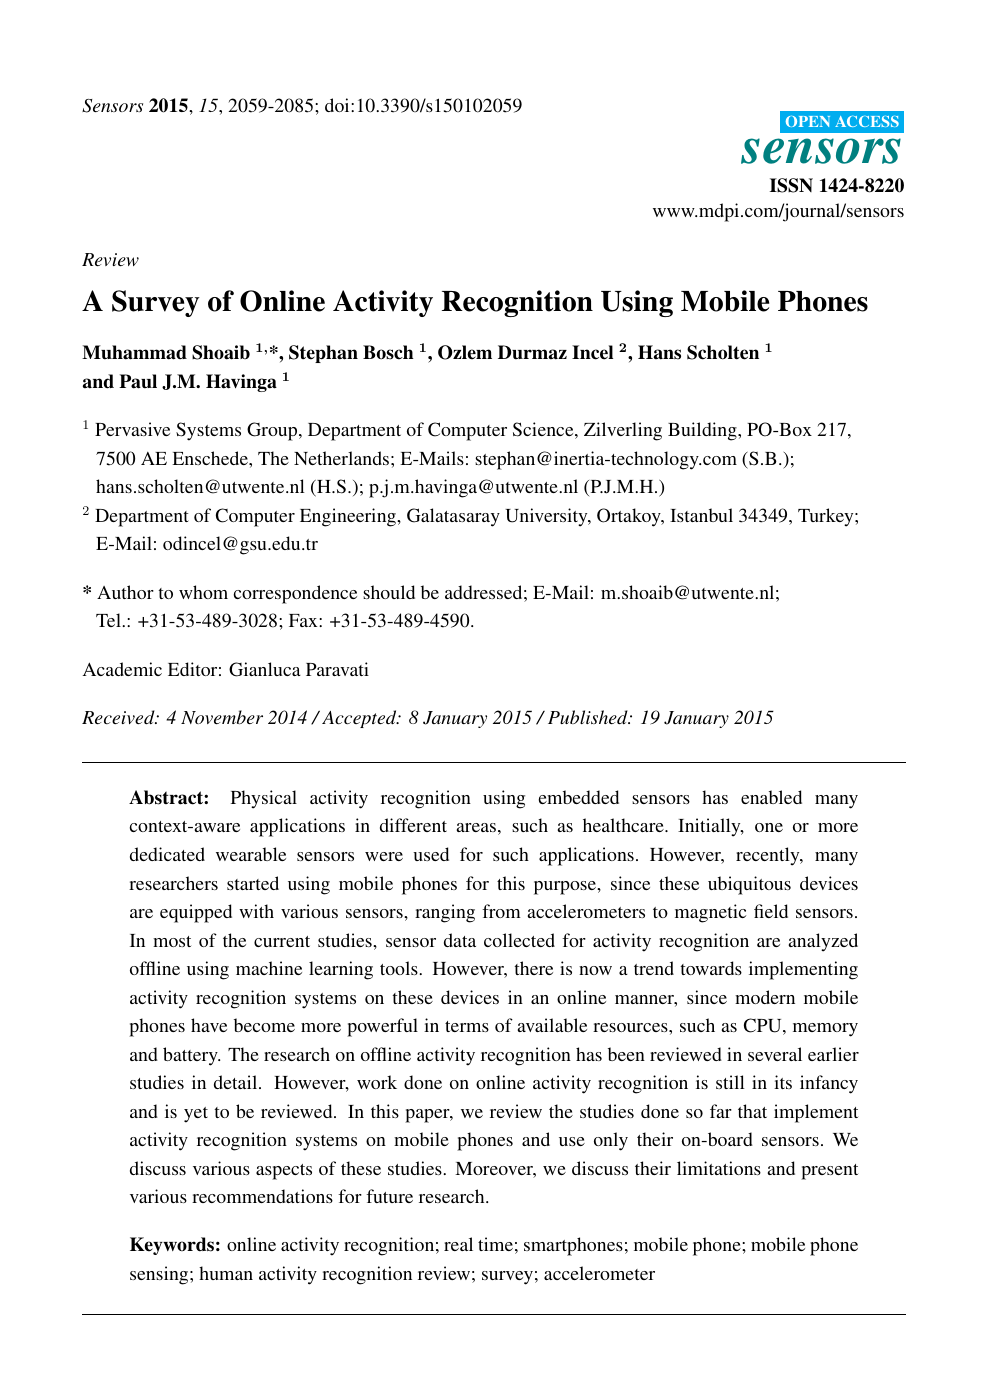 A Survey Of Online Activity Recognition Using Mobile Phones Topic Of Research Paper In Computer And Information Sciences Download Scholarly Article Pdf And Read For Free On Cyberleninka Open Science Hub